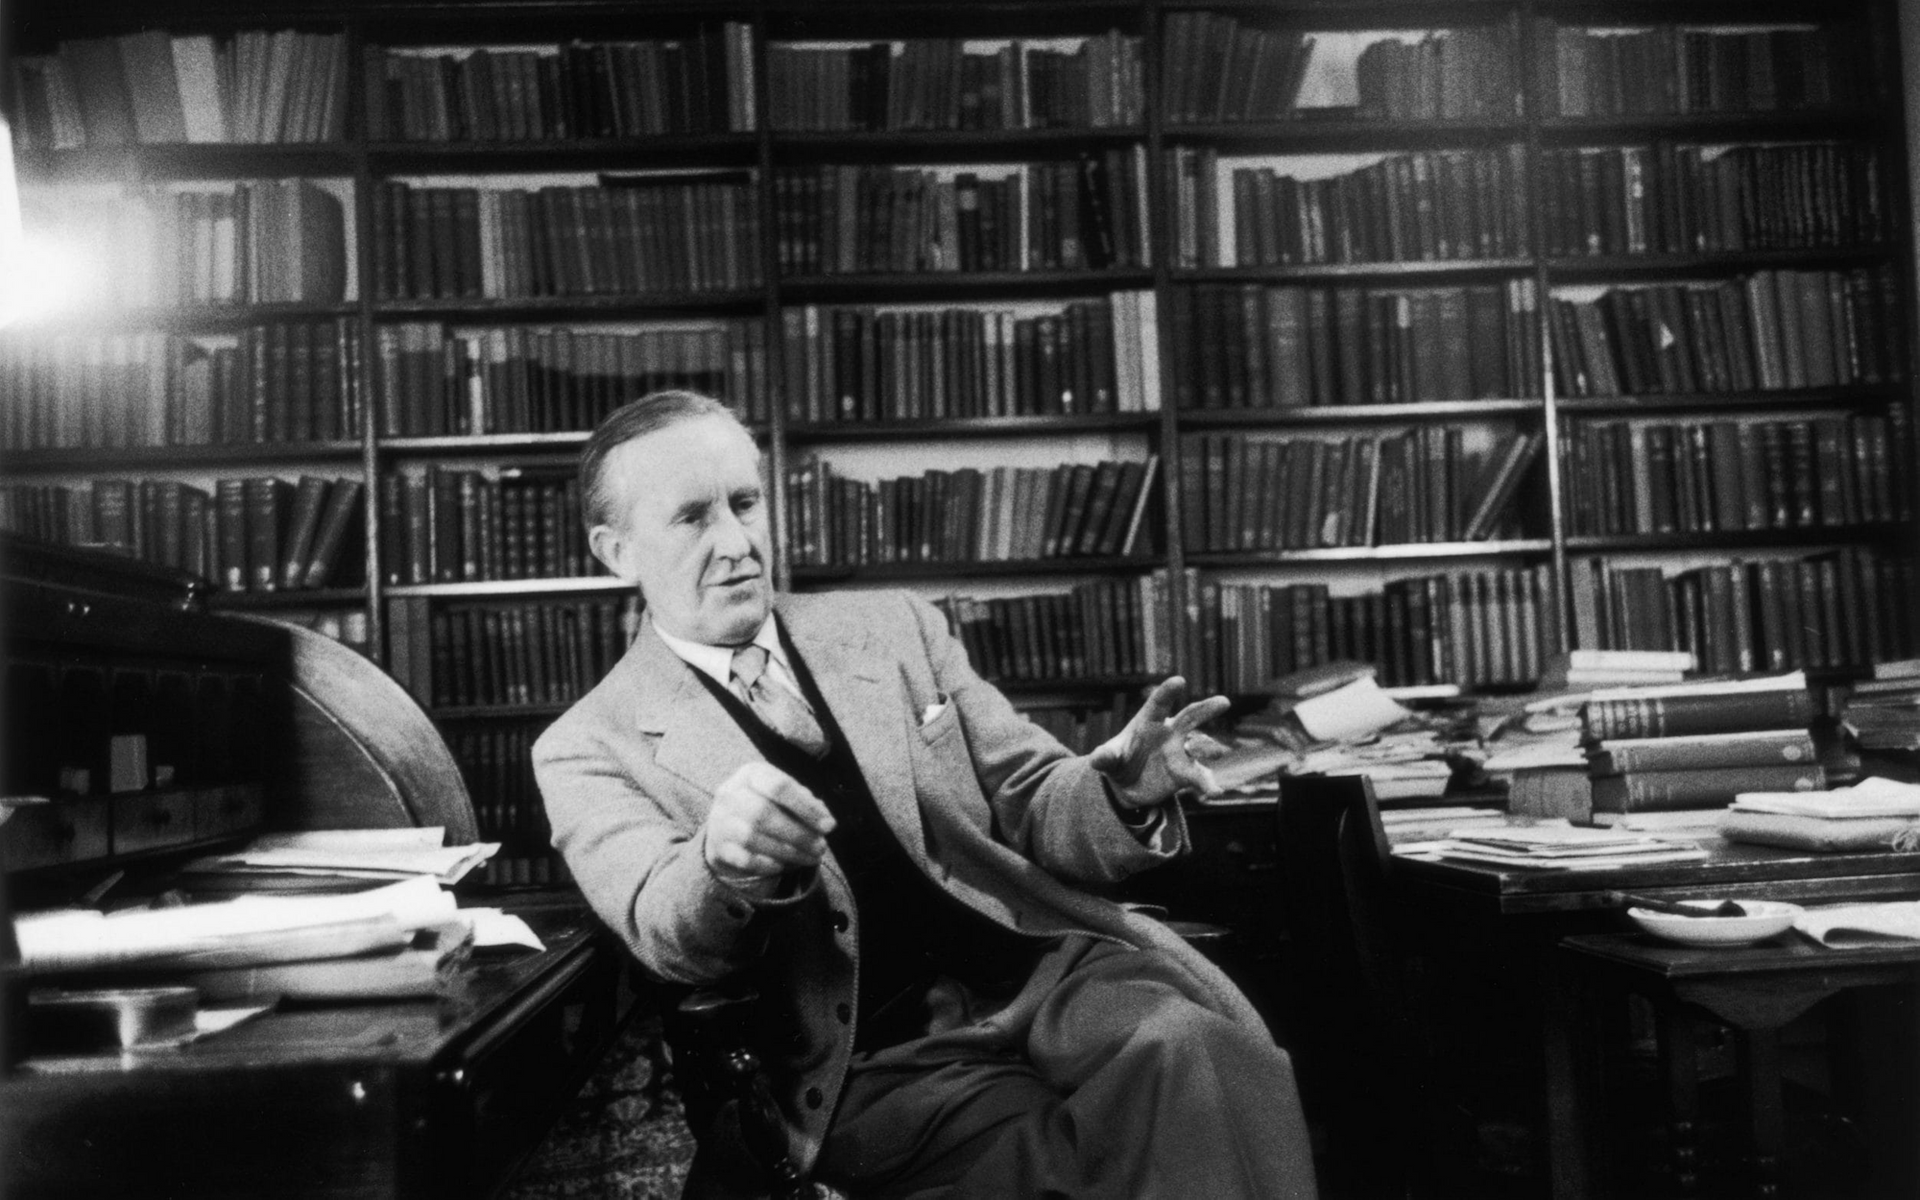 jrr tolkien in his study